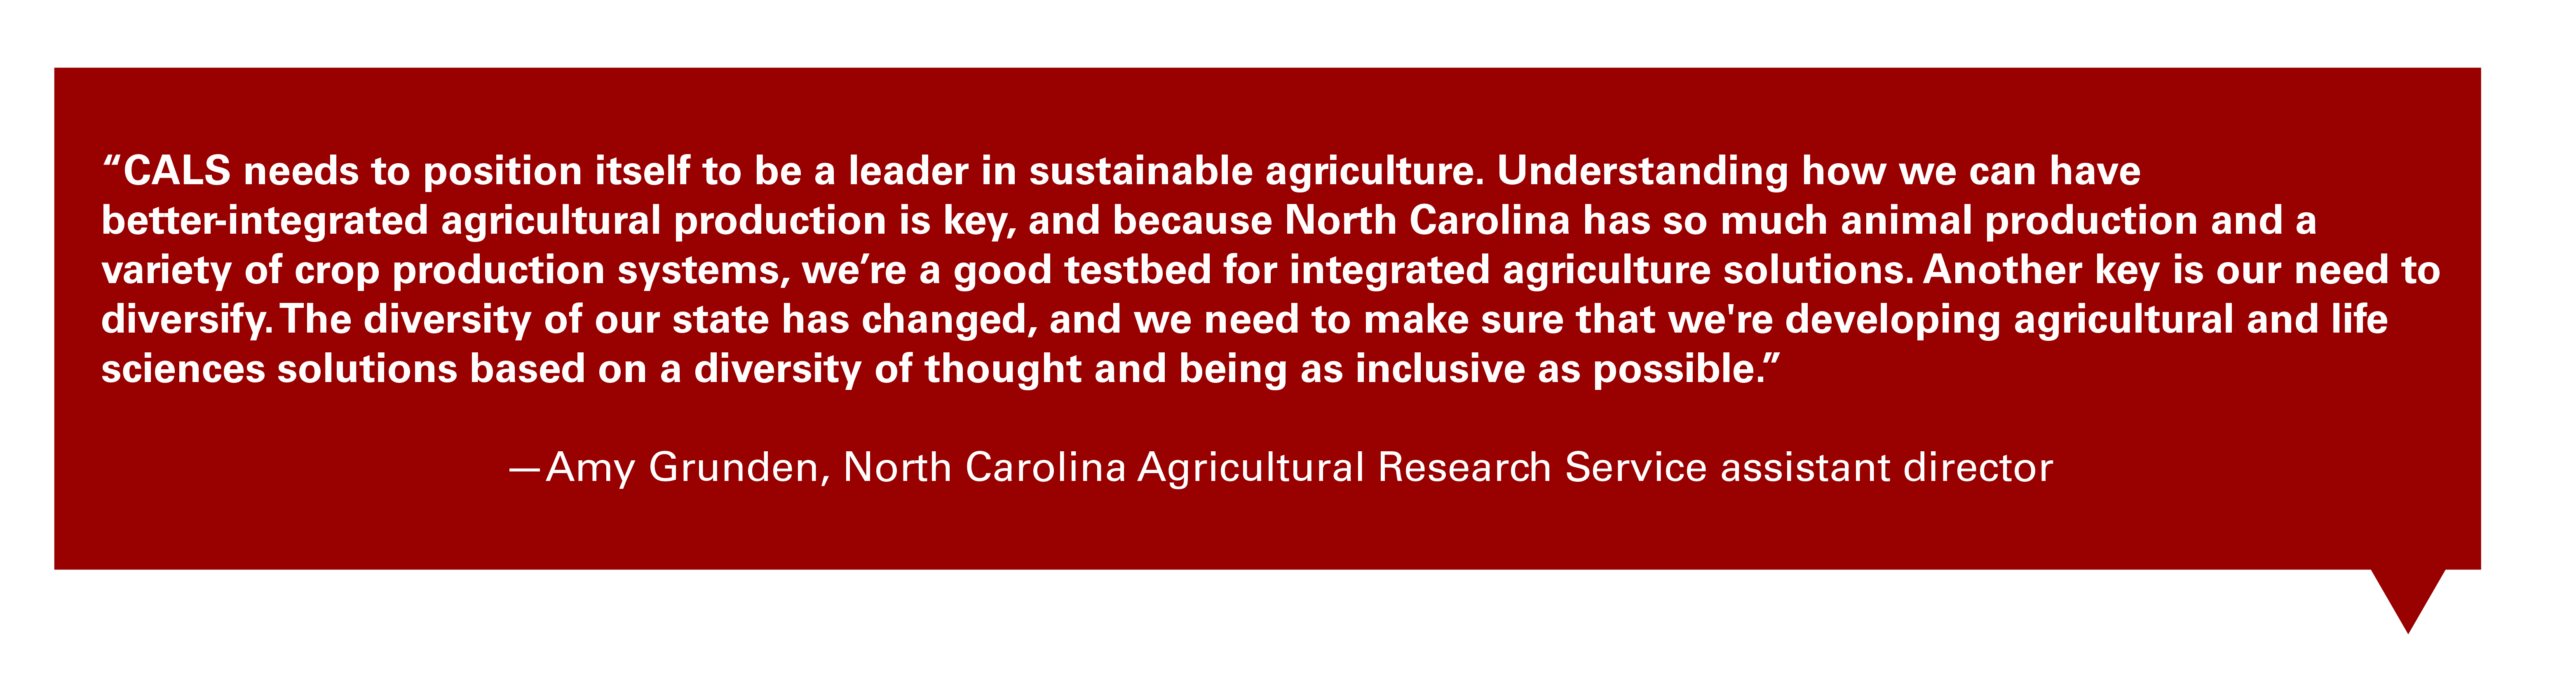 Quote from Amy Grunden, North Carolina Agricultural Research Service assistant director:

"CALS needs to position itself to be a leader in sustainable agriculture. Understanding how we can have better-integrated agricultural production is key, and because North Carolina has so much animal production and a variety of crop production systems, we’re a good testbed for integrated agriculture solutions. Another key is our need to diversify. The diversity of our state has changed, and we need to make sure that we're developing agricultural and life sciences solutions based on a diversity of thought and being as inclusive as possible."